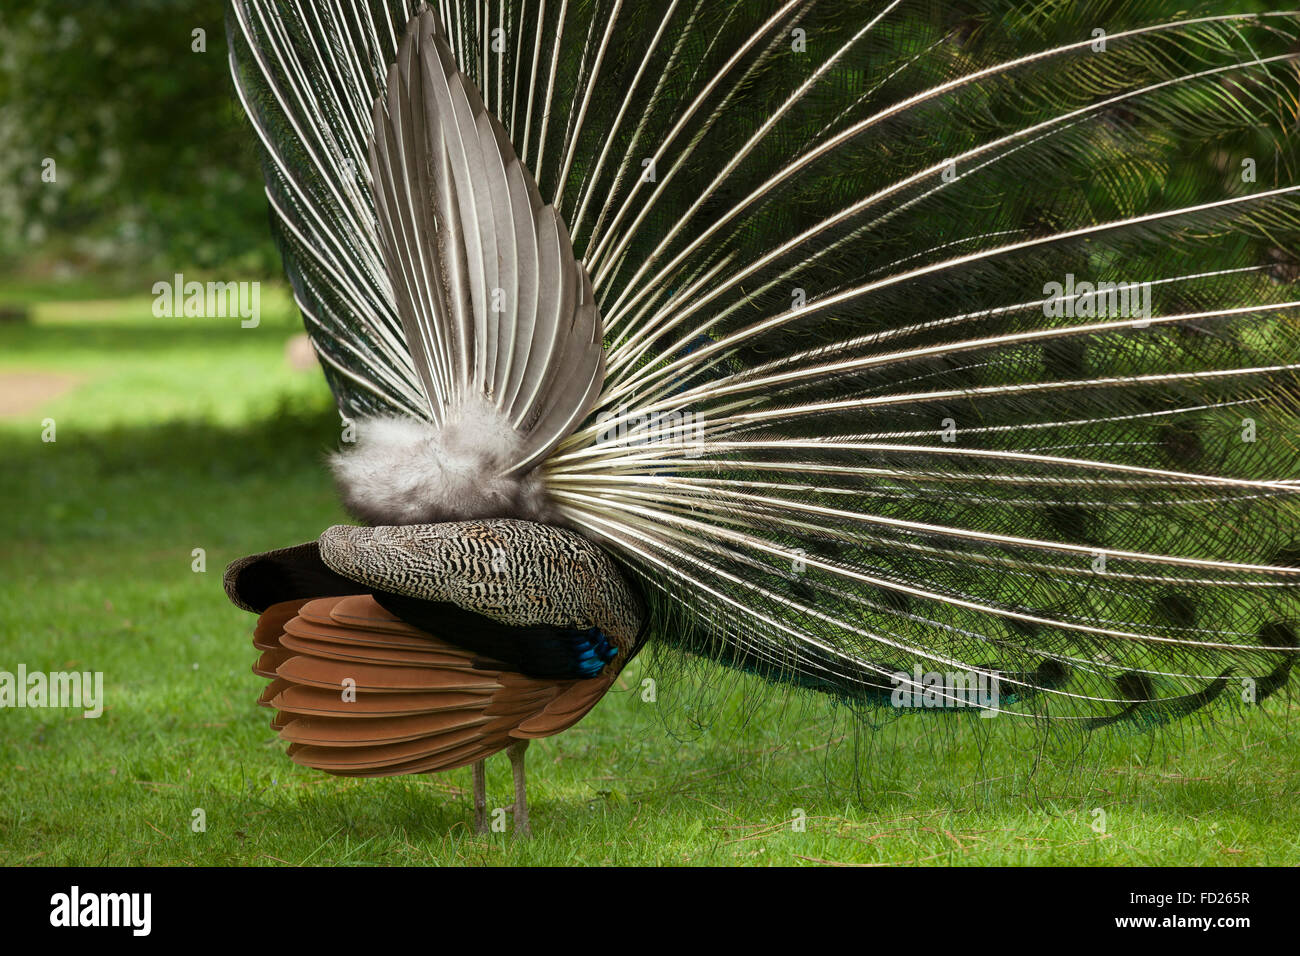 Europe, Germany, peacock, common peafowl (lat. Pavo cristatus), displaying tail, at the Forstbotanischer Garten, an arboretum an Stock Photo